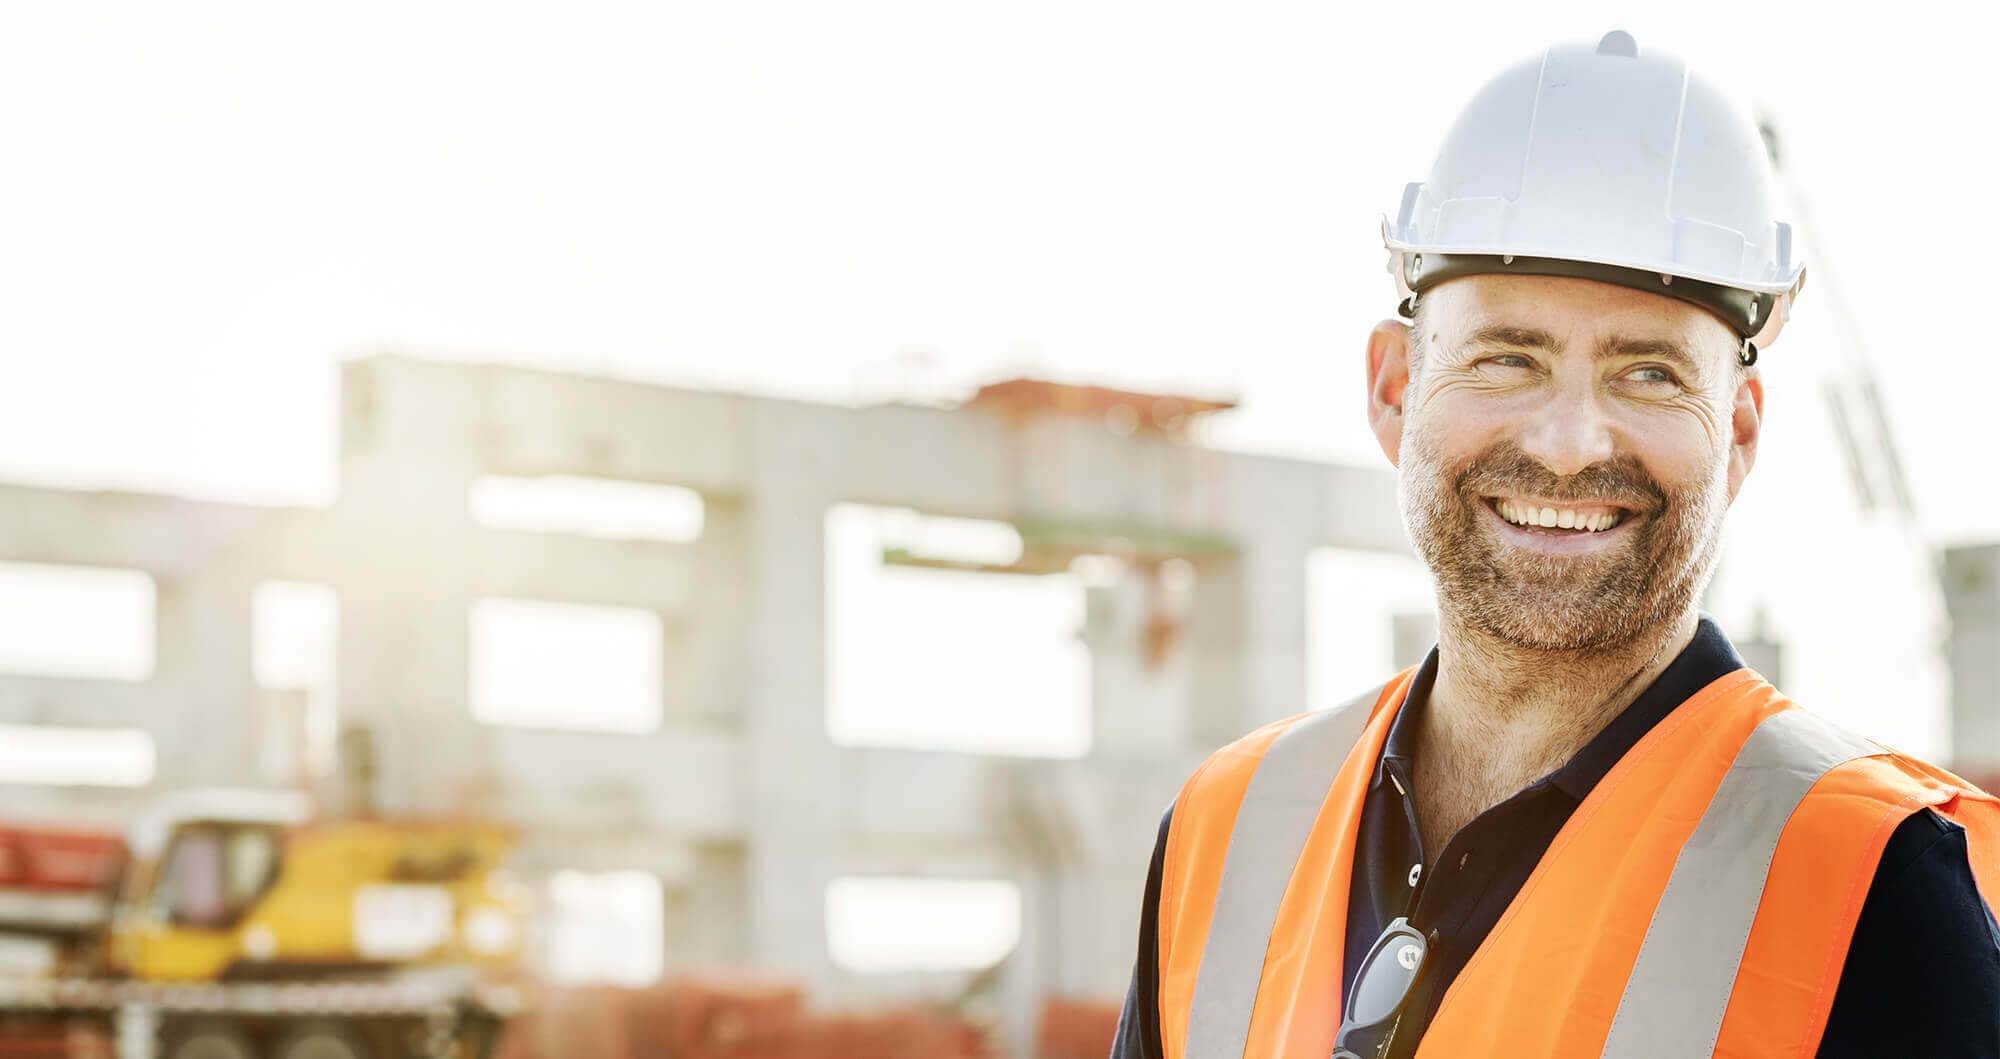 A smiling construction worker on-site